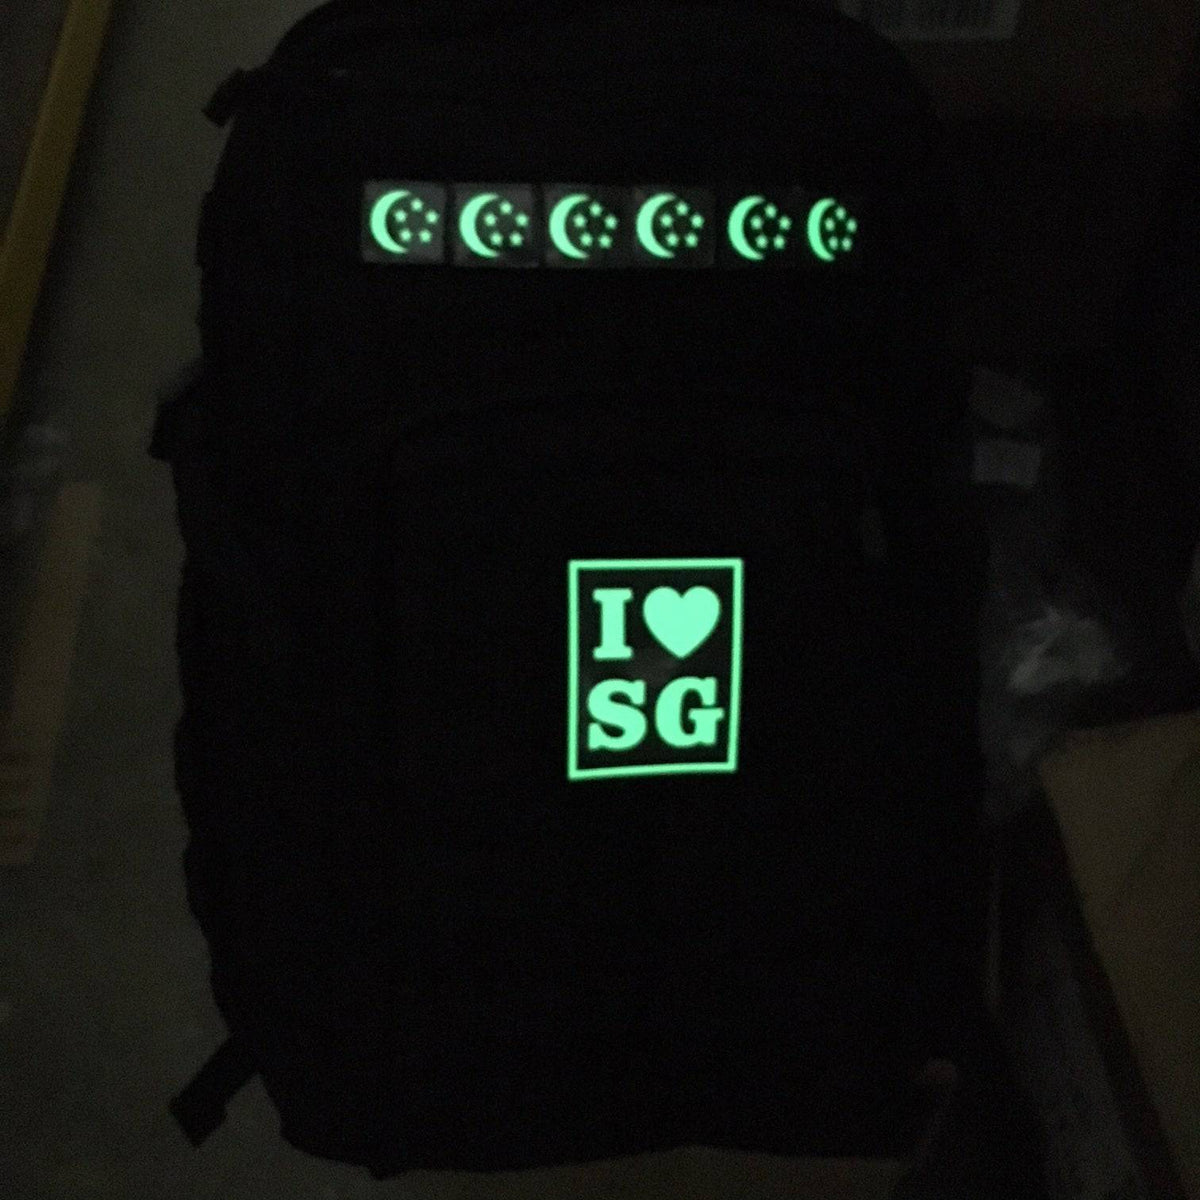 I LOVE SG PATCH - GLOW IN THE DARK - The Morale Patches